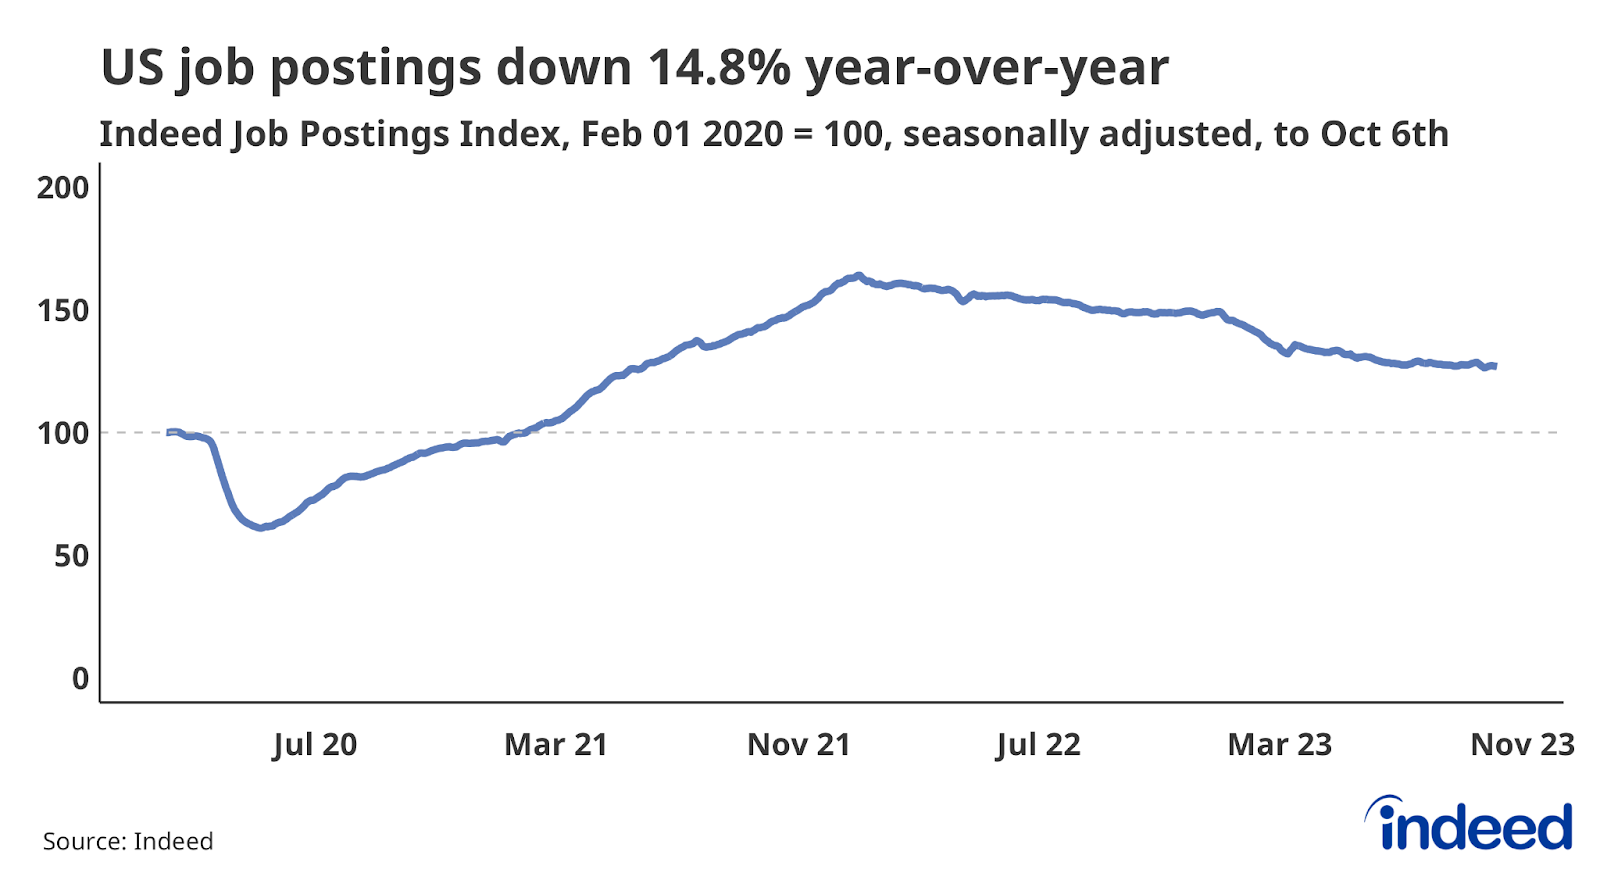 Line graph titled "US job postings down 14.8% year-over-year," shows the increase of Indeed job postings from their pre-pandemic baseline. US job postings have fallen 14.8% since October 6, 2022.